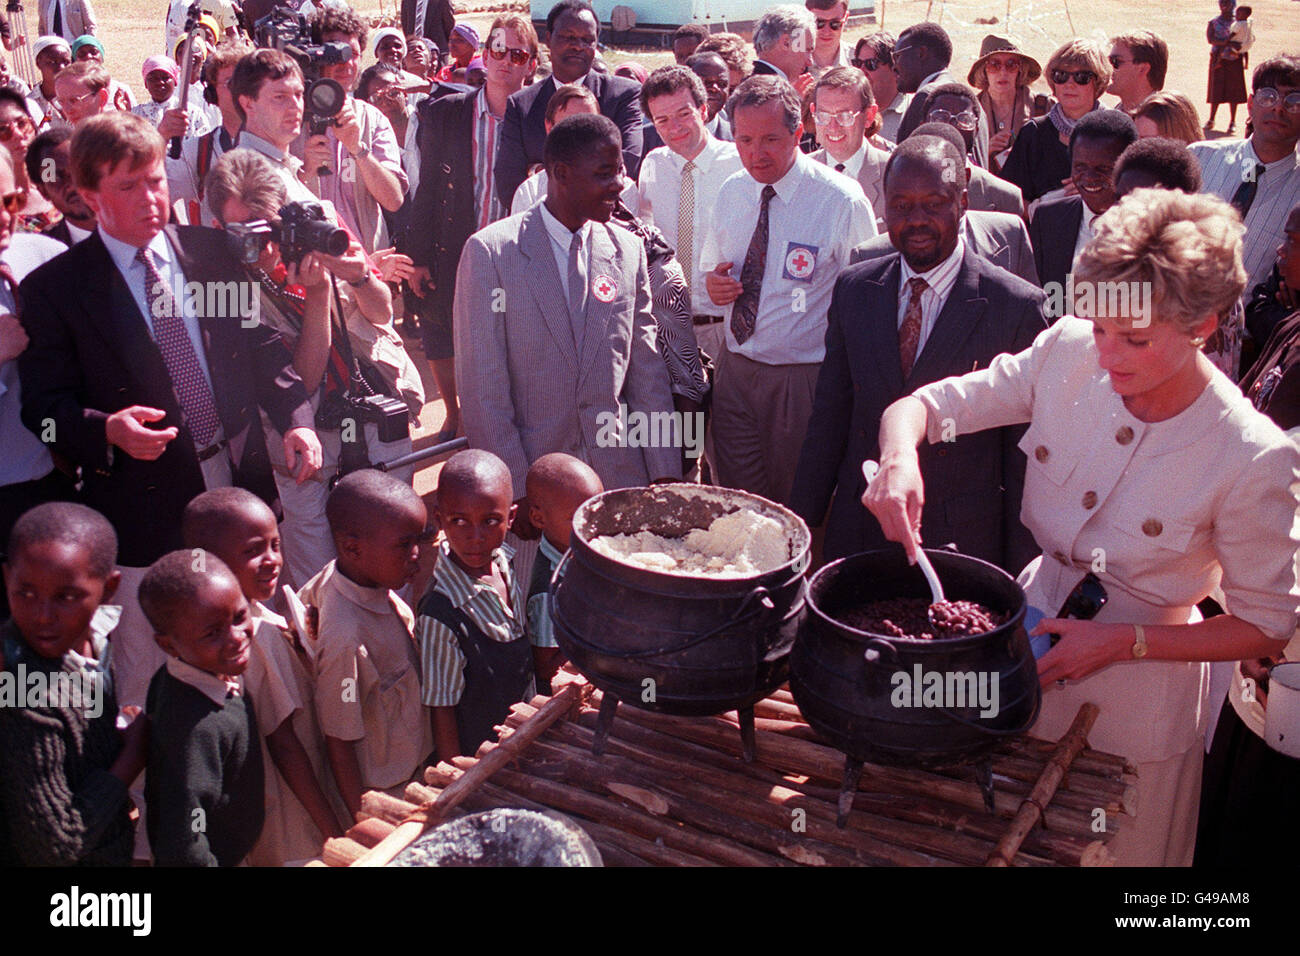 Children wait in line as the Princes of Wales lends a hand to serve the food at the Child Feeding Scheme at Nemazuva Primary School in Zimbabwe. Stock Photo